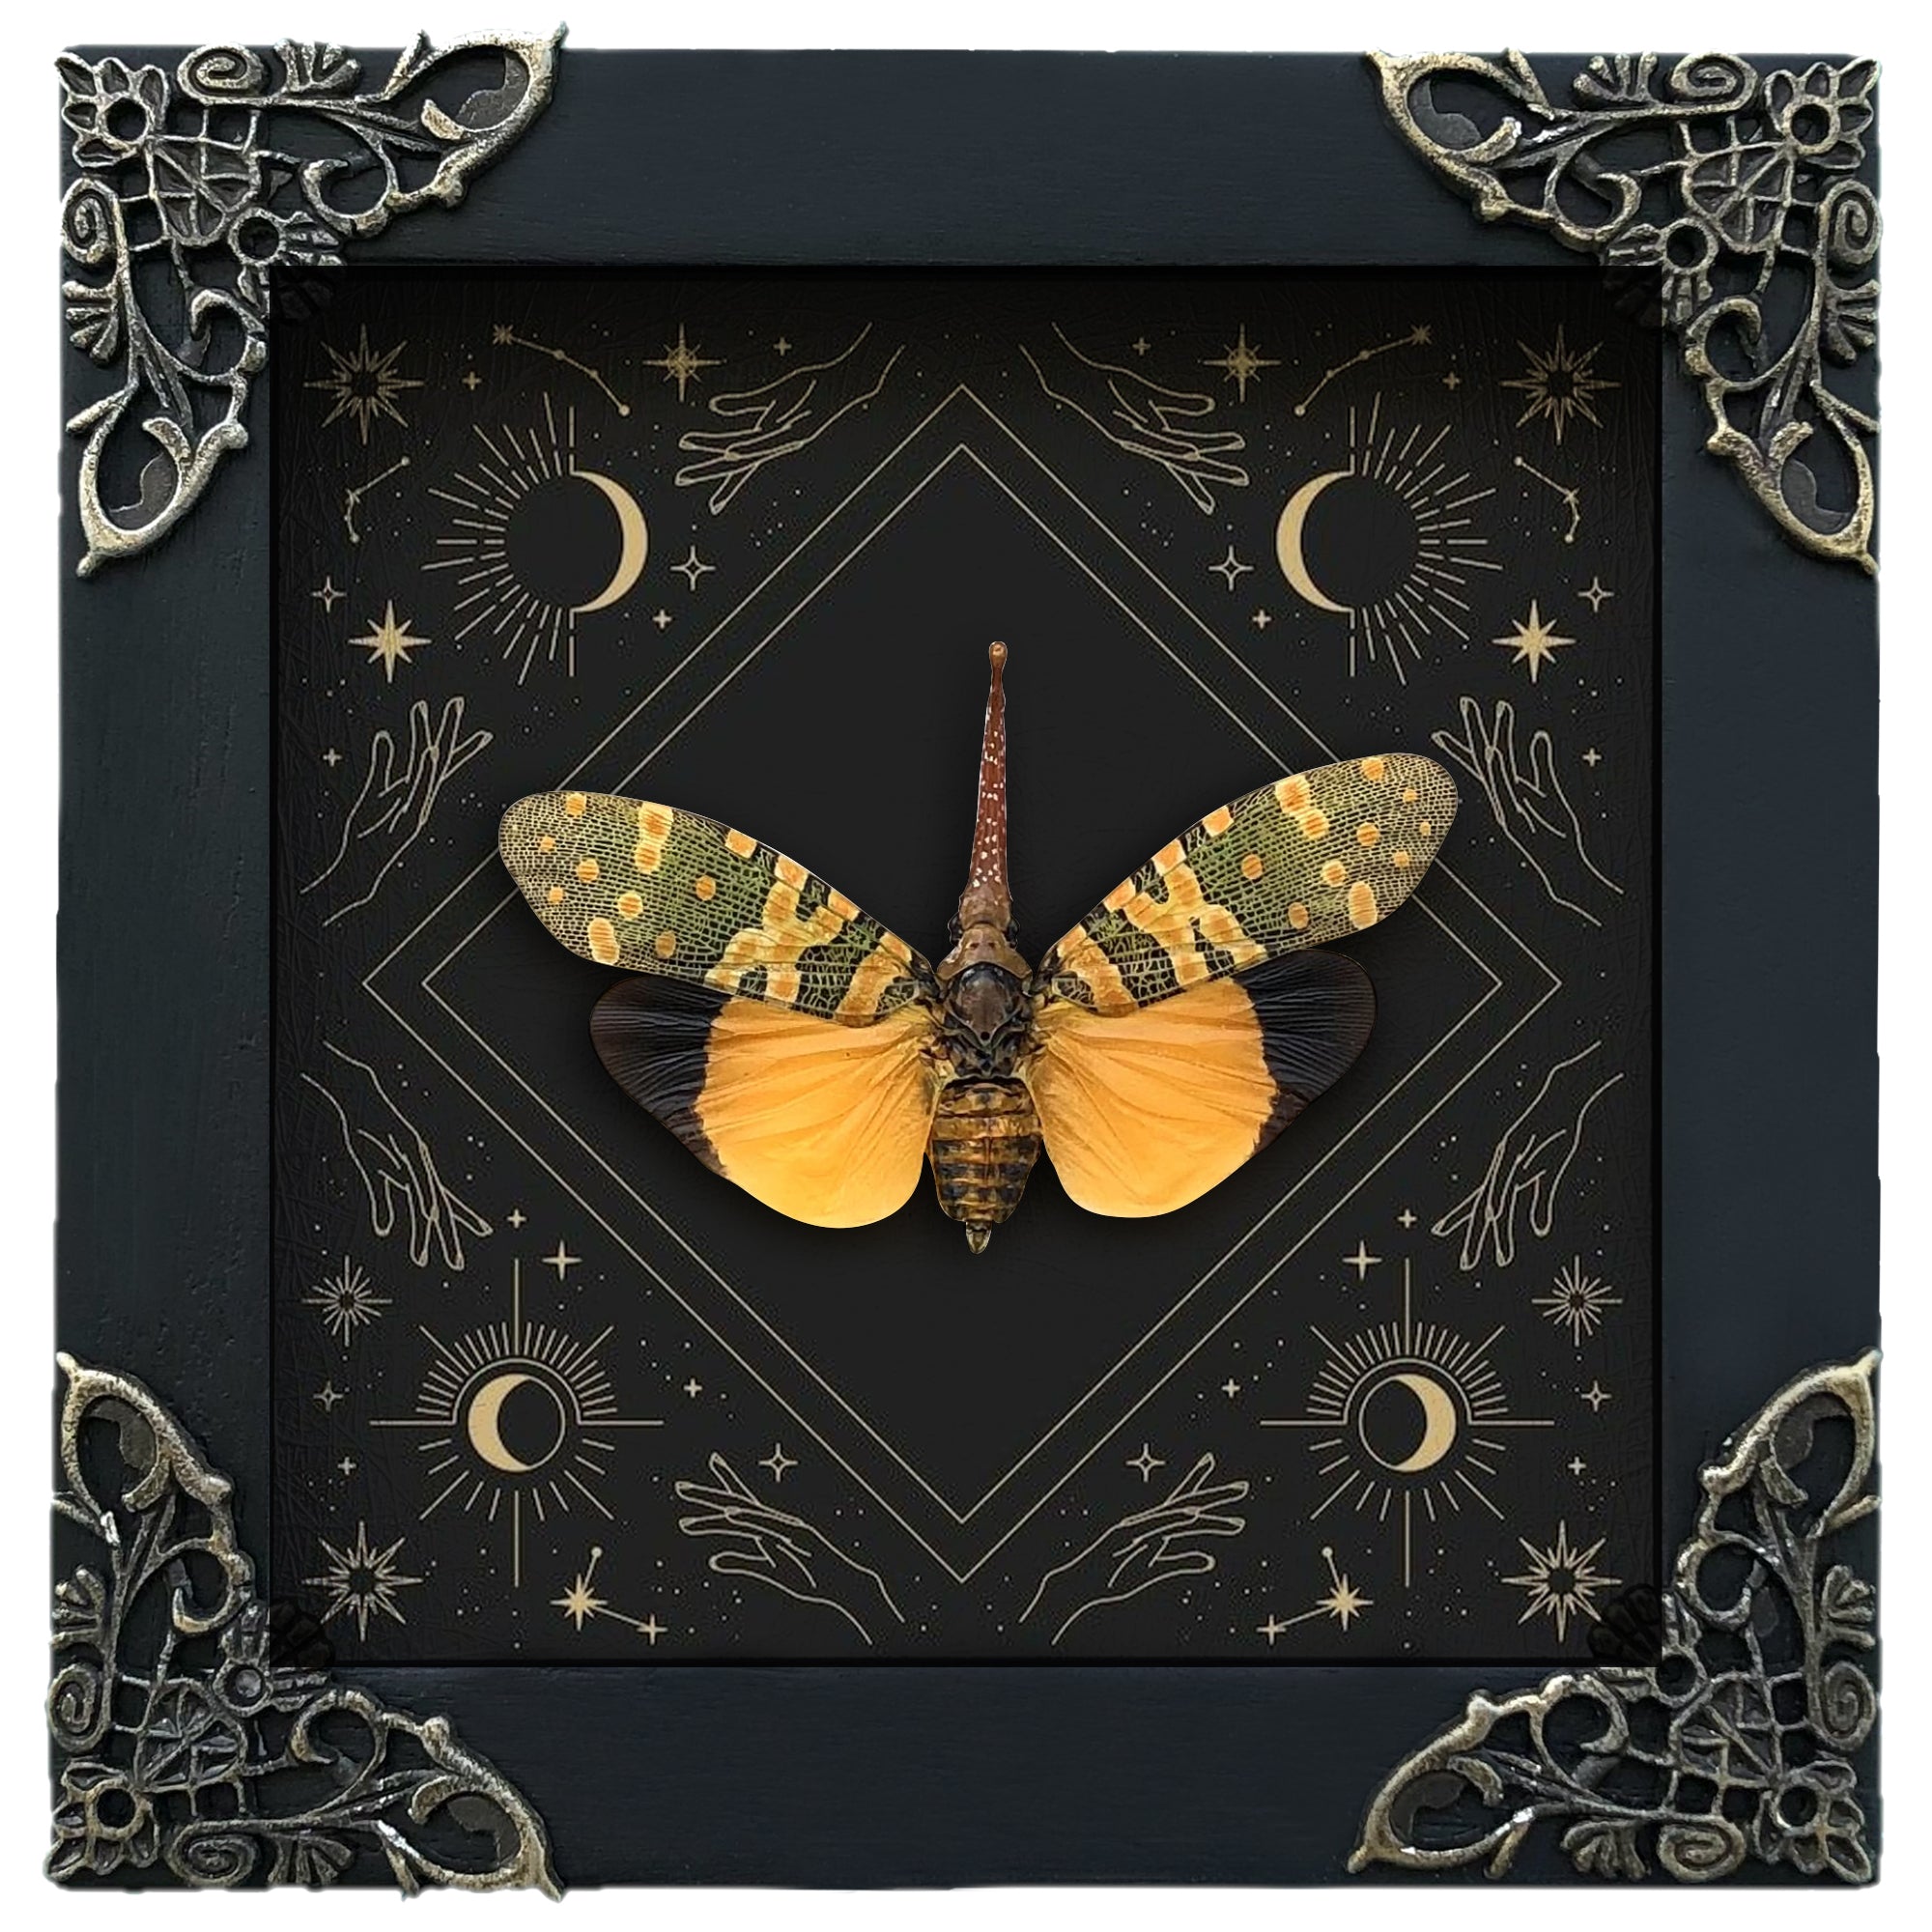 Yellow Lanternfly Cicada Taxidermy Moon Phase Star Astronomy Specimen Astrology Background Frame Insect K12-55-AS1